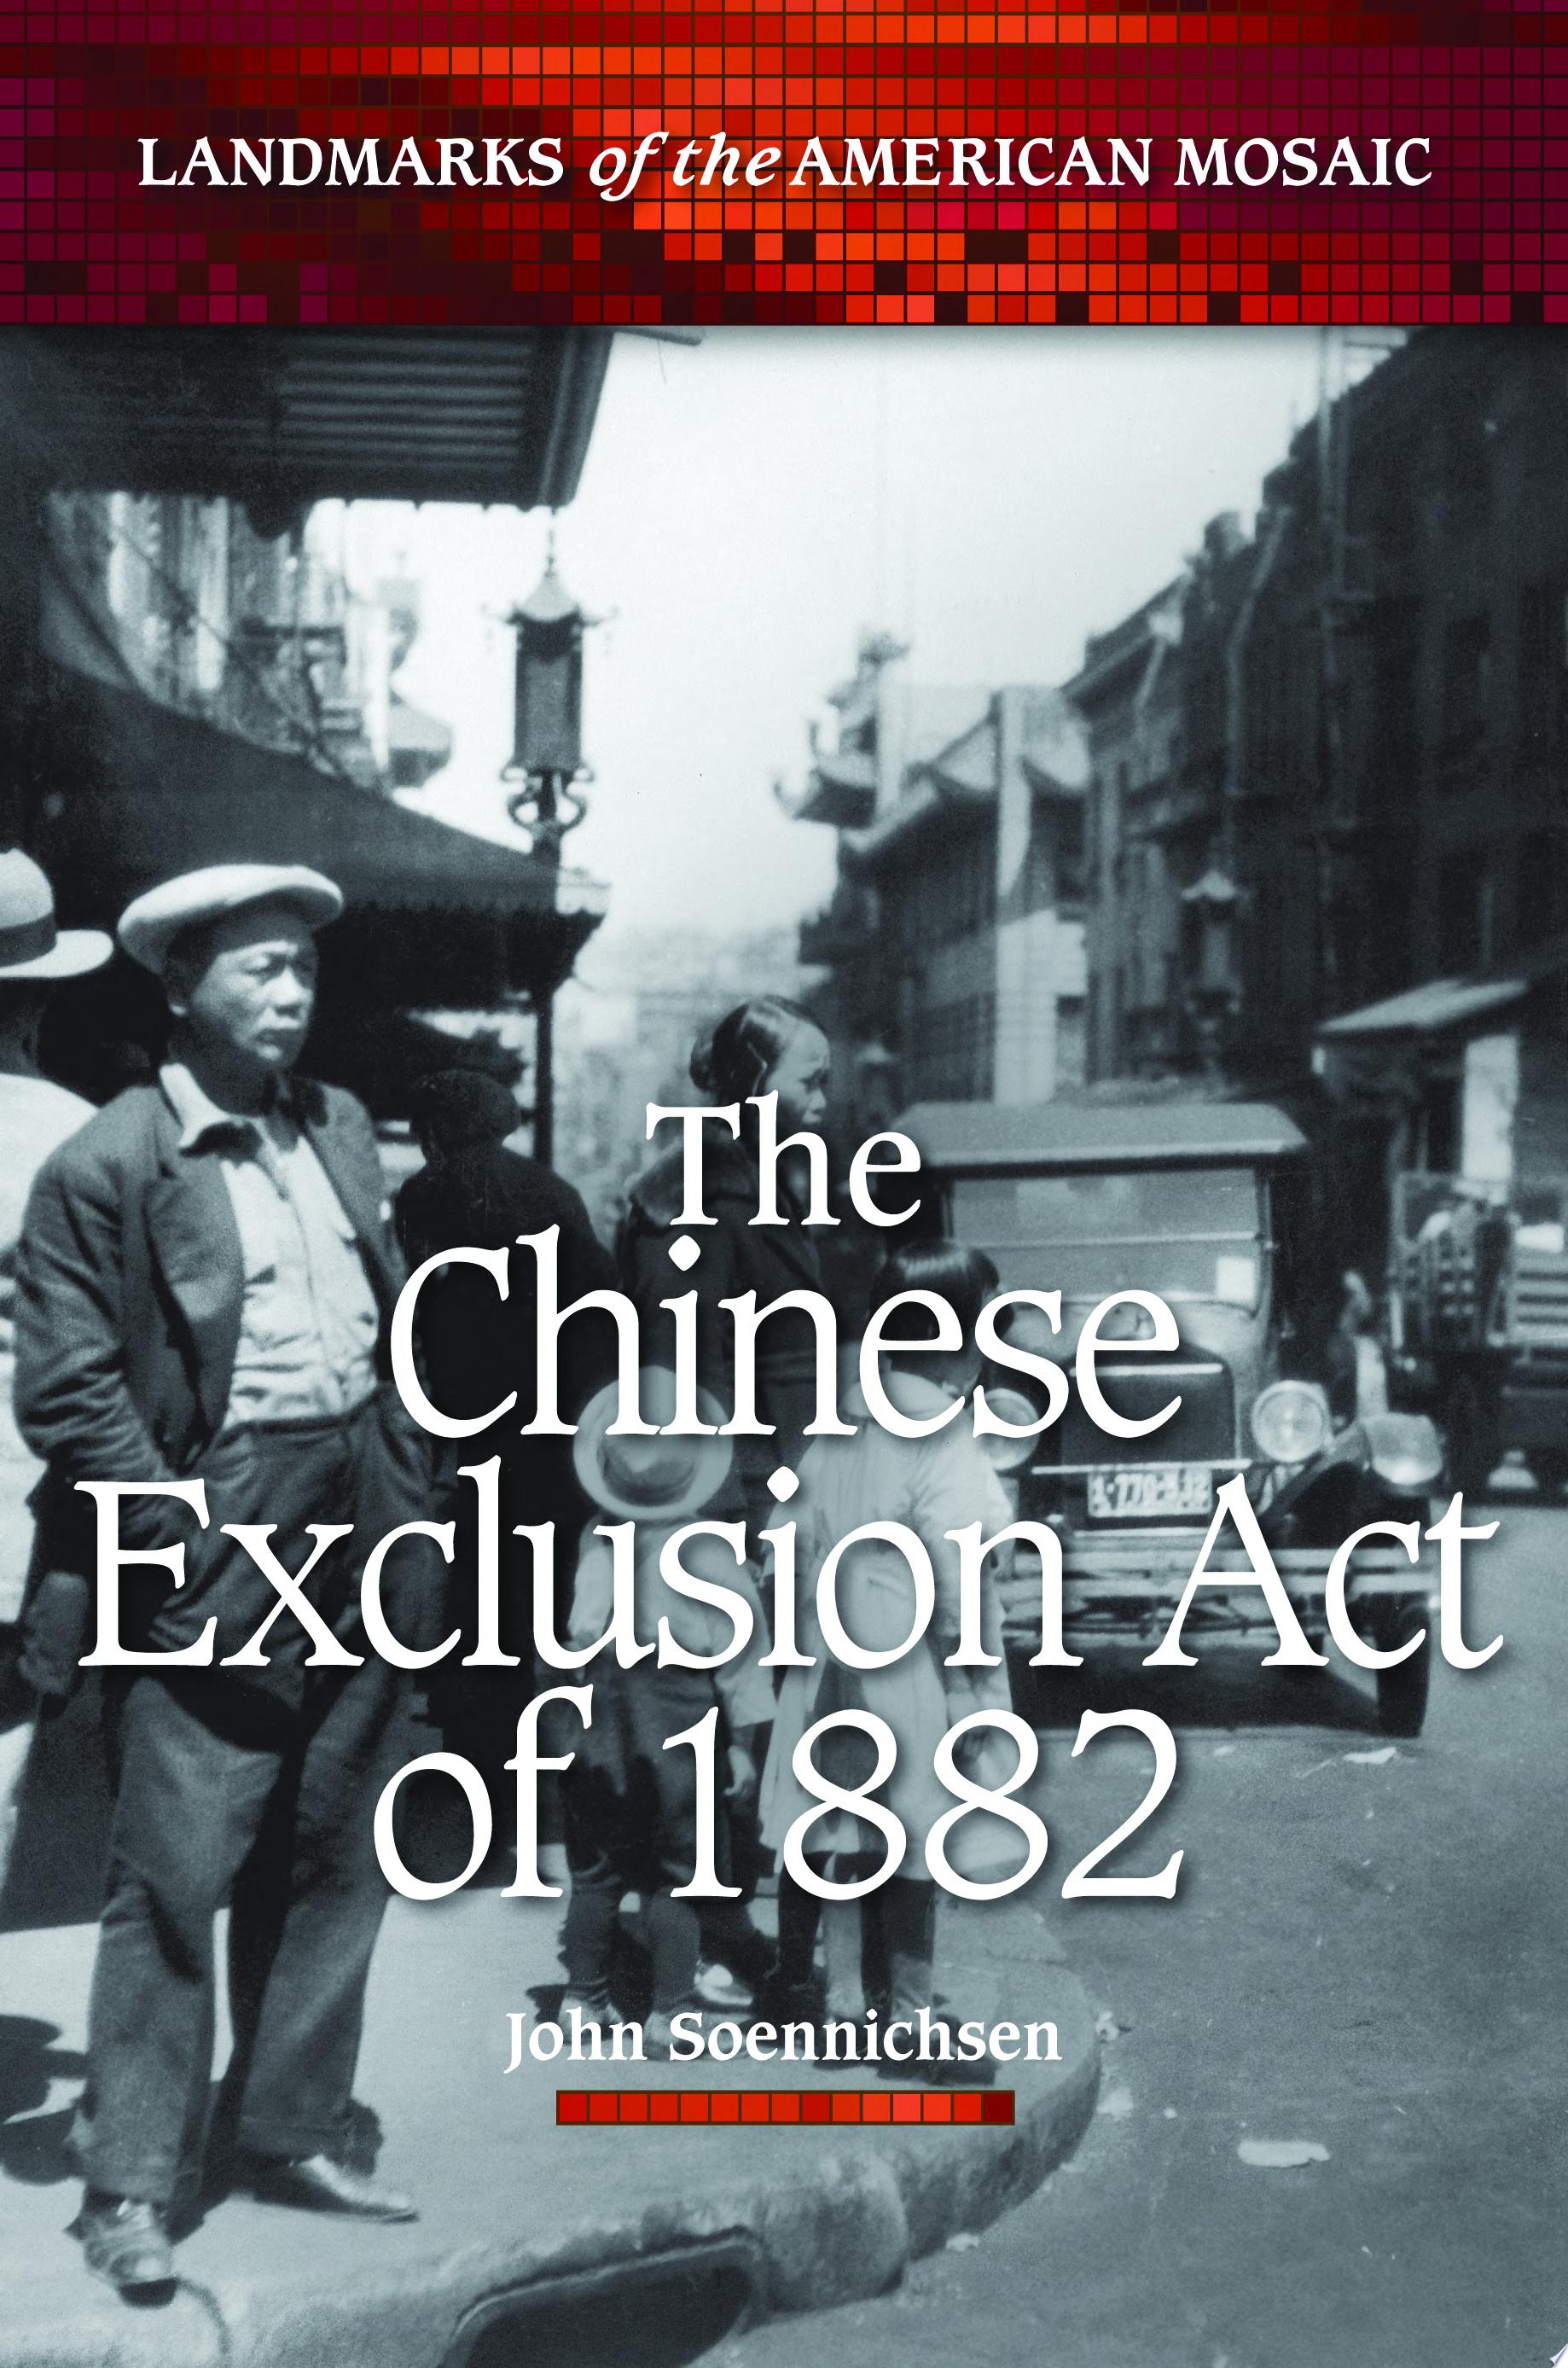 Image for "The Chinese Exclusion Act of 1882"